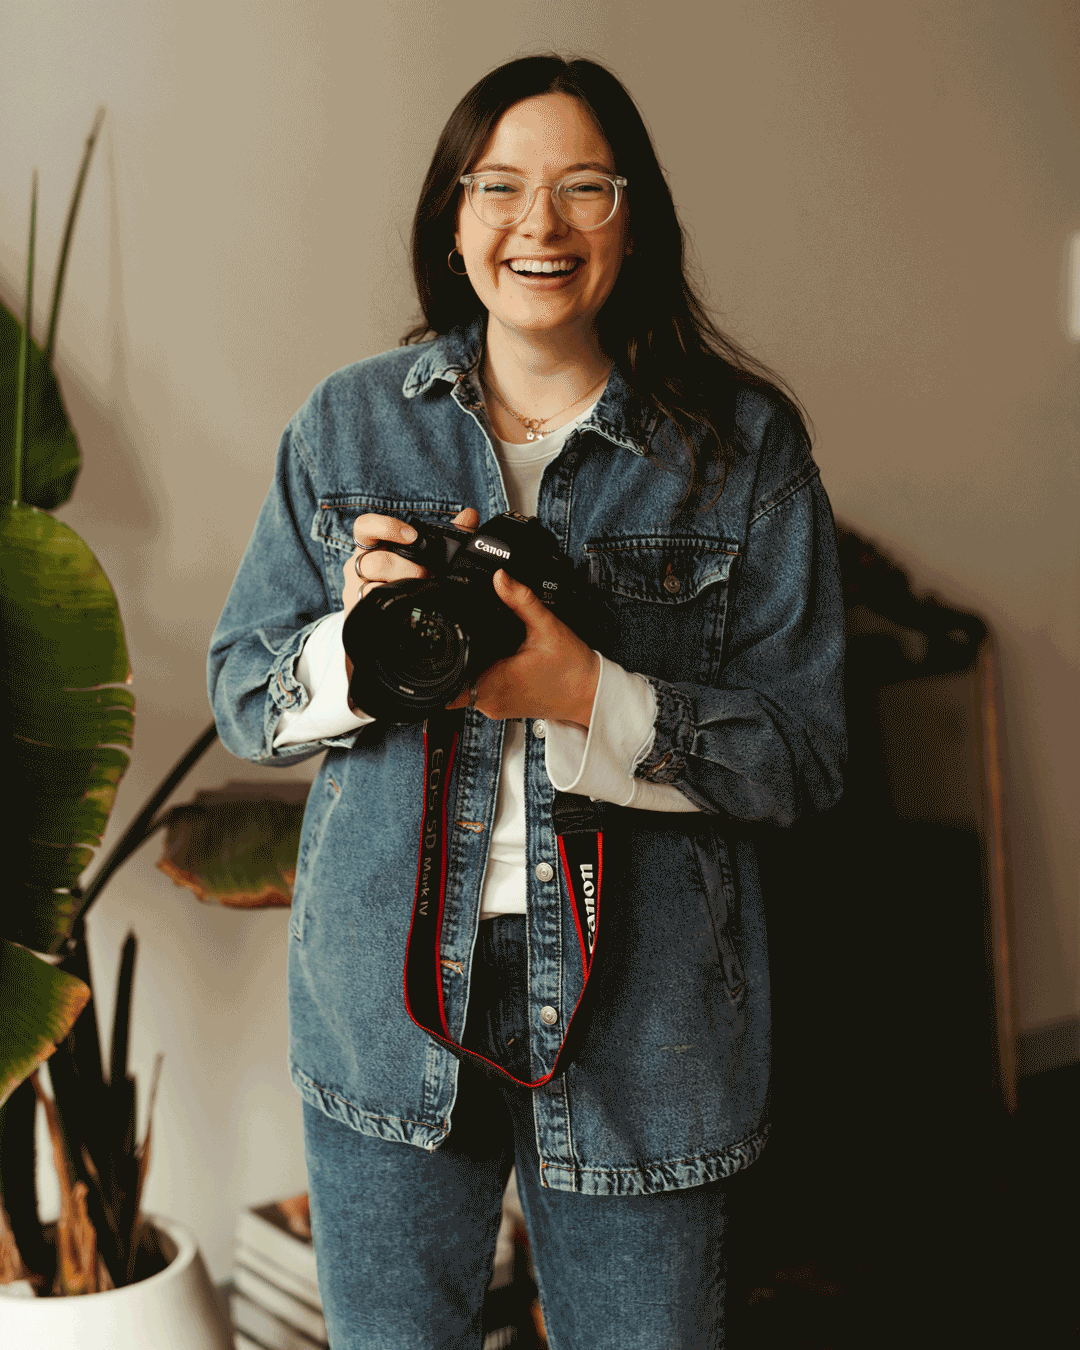 woman holding camera while wearing a denim jacket and smiling